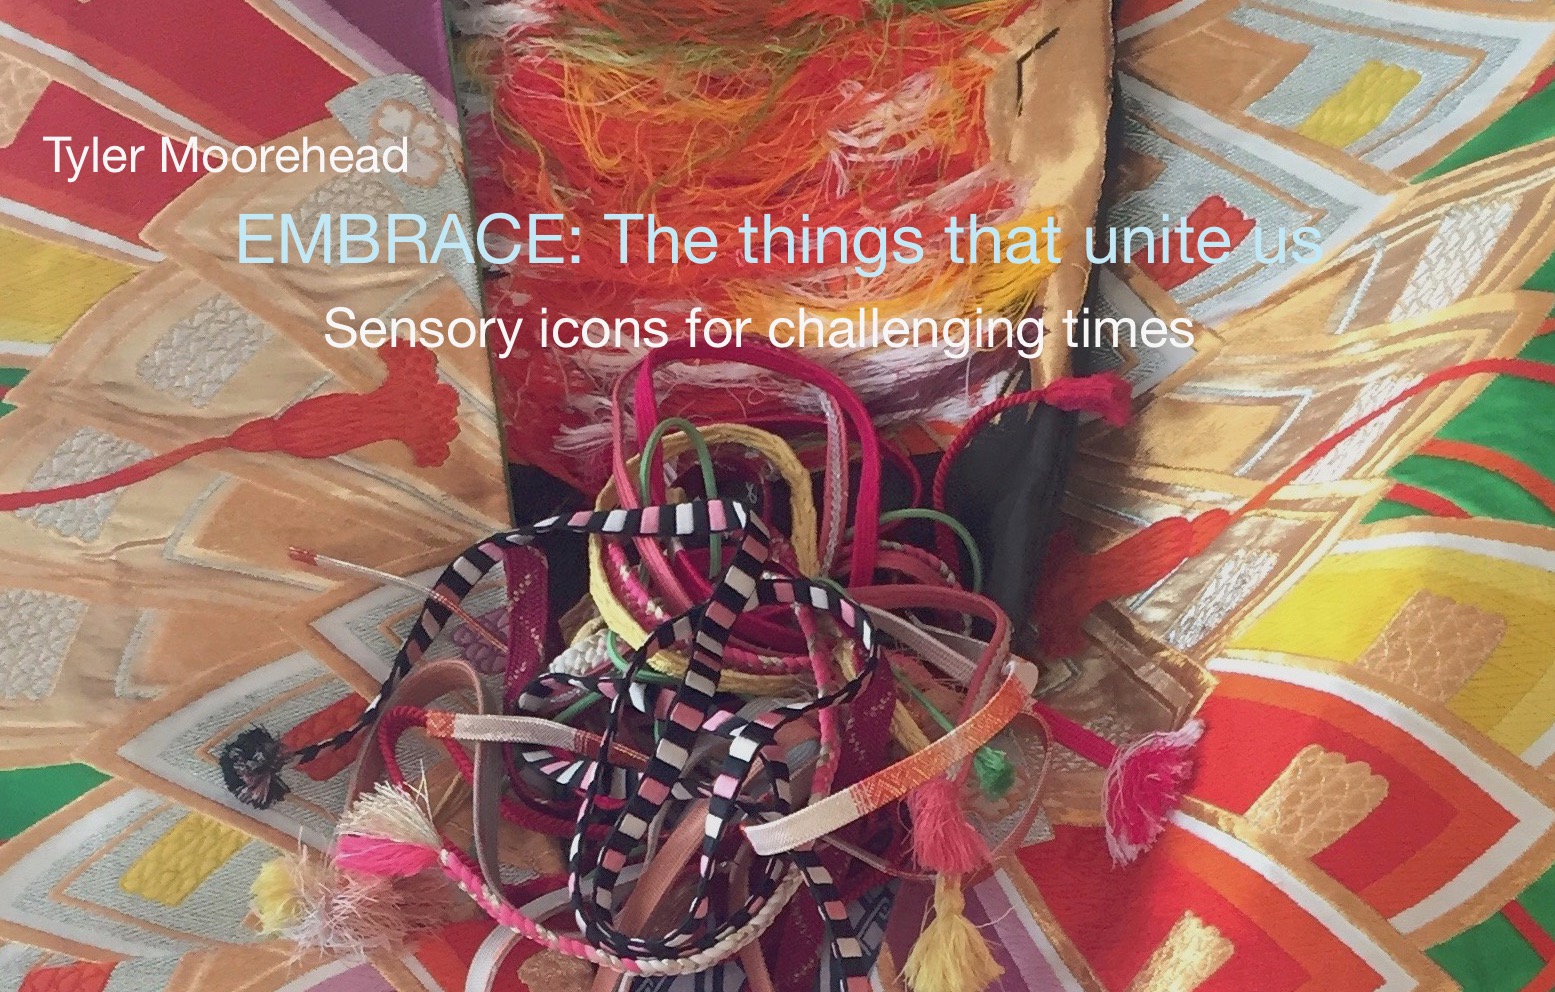 EMBRACE: The things that unite us